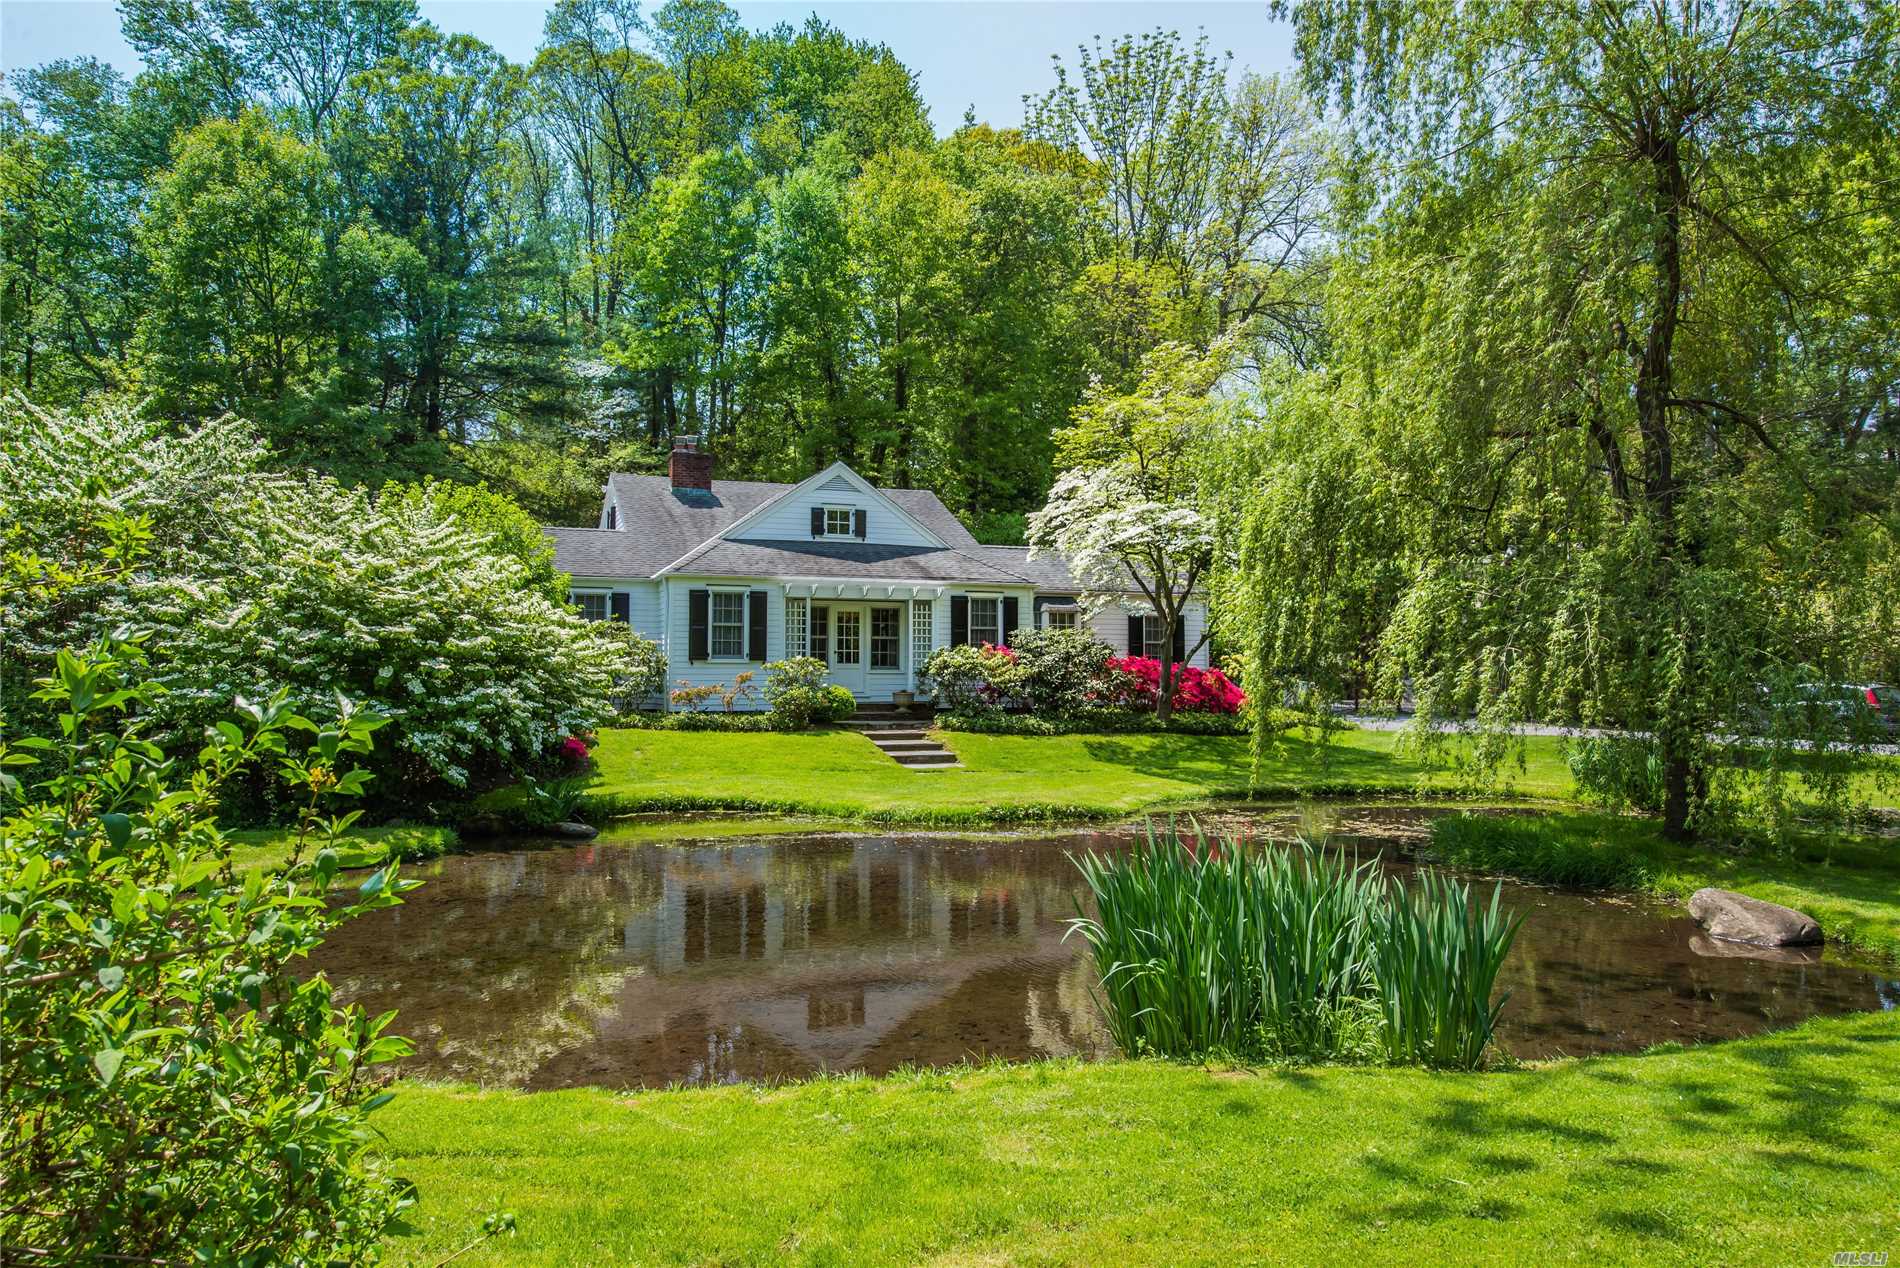 Pristine And Fully Renovated Home On 2.5 Acres Overlooking A Pond And Stream. The Home Features 3 Bedrooms And 2.5 Baths, Eik With Top Of The Line Appliances, Living Room With Fireplace, Sunroom And Library. In-Ground Pool And Terrace Can Be Accessed From The Sun Room And Master. Large Field Lies Beyond.